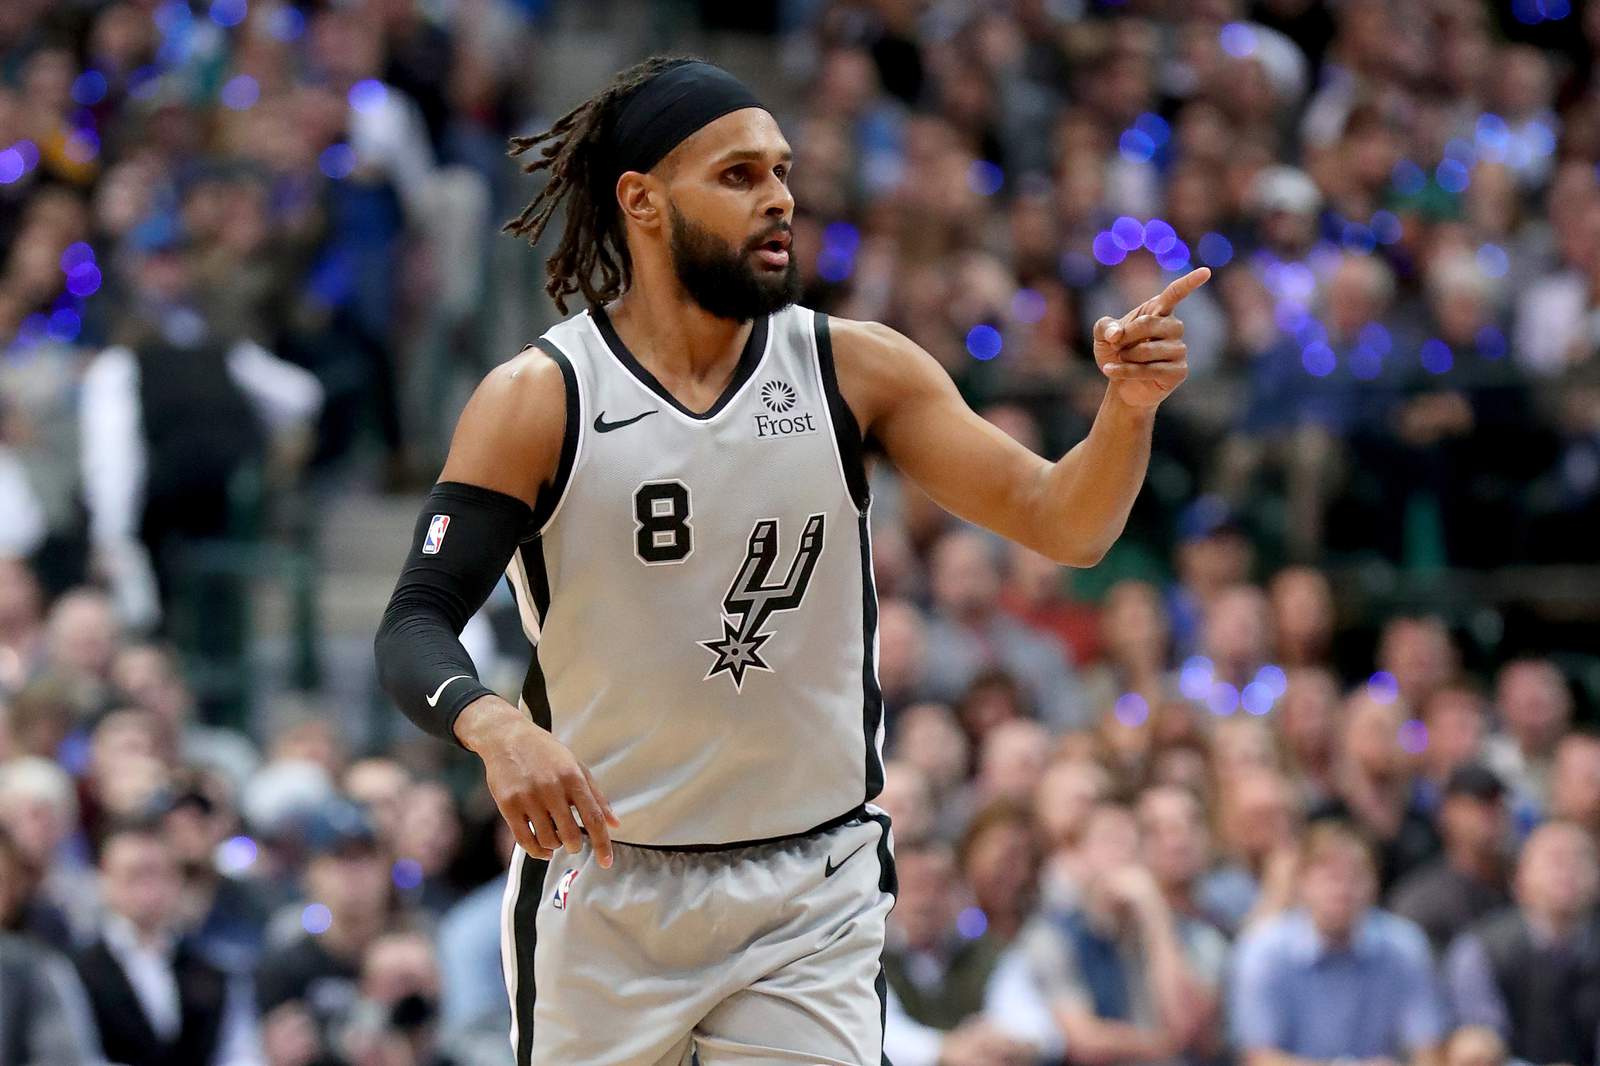 Spurs Patty Mills donating $1 million to fight racism